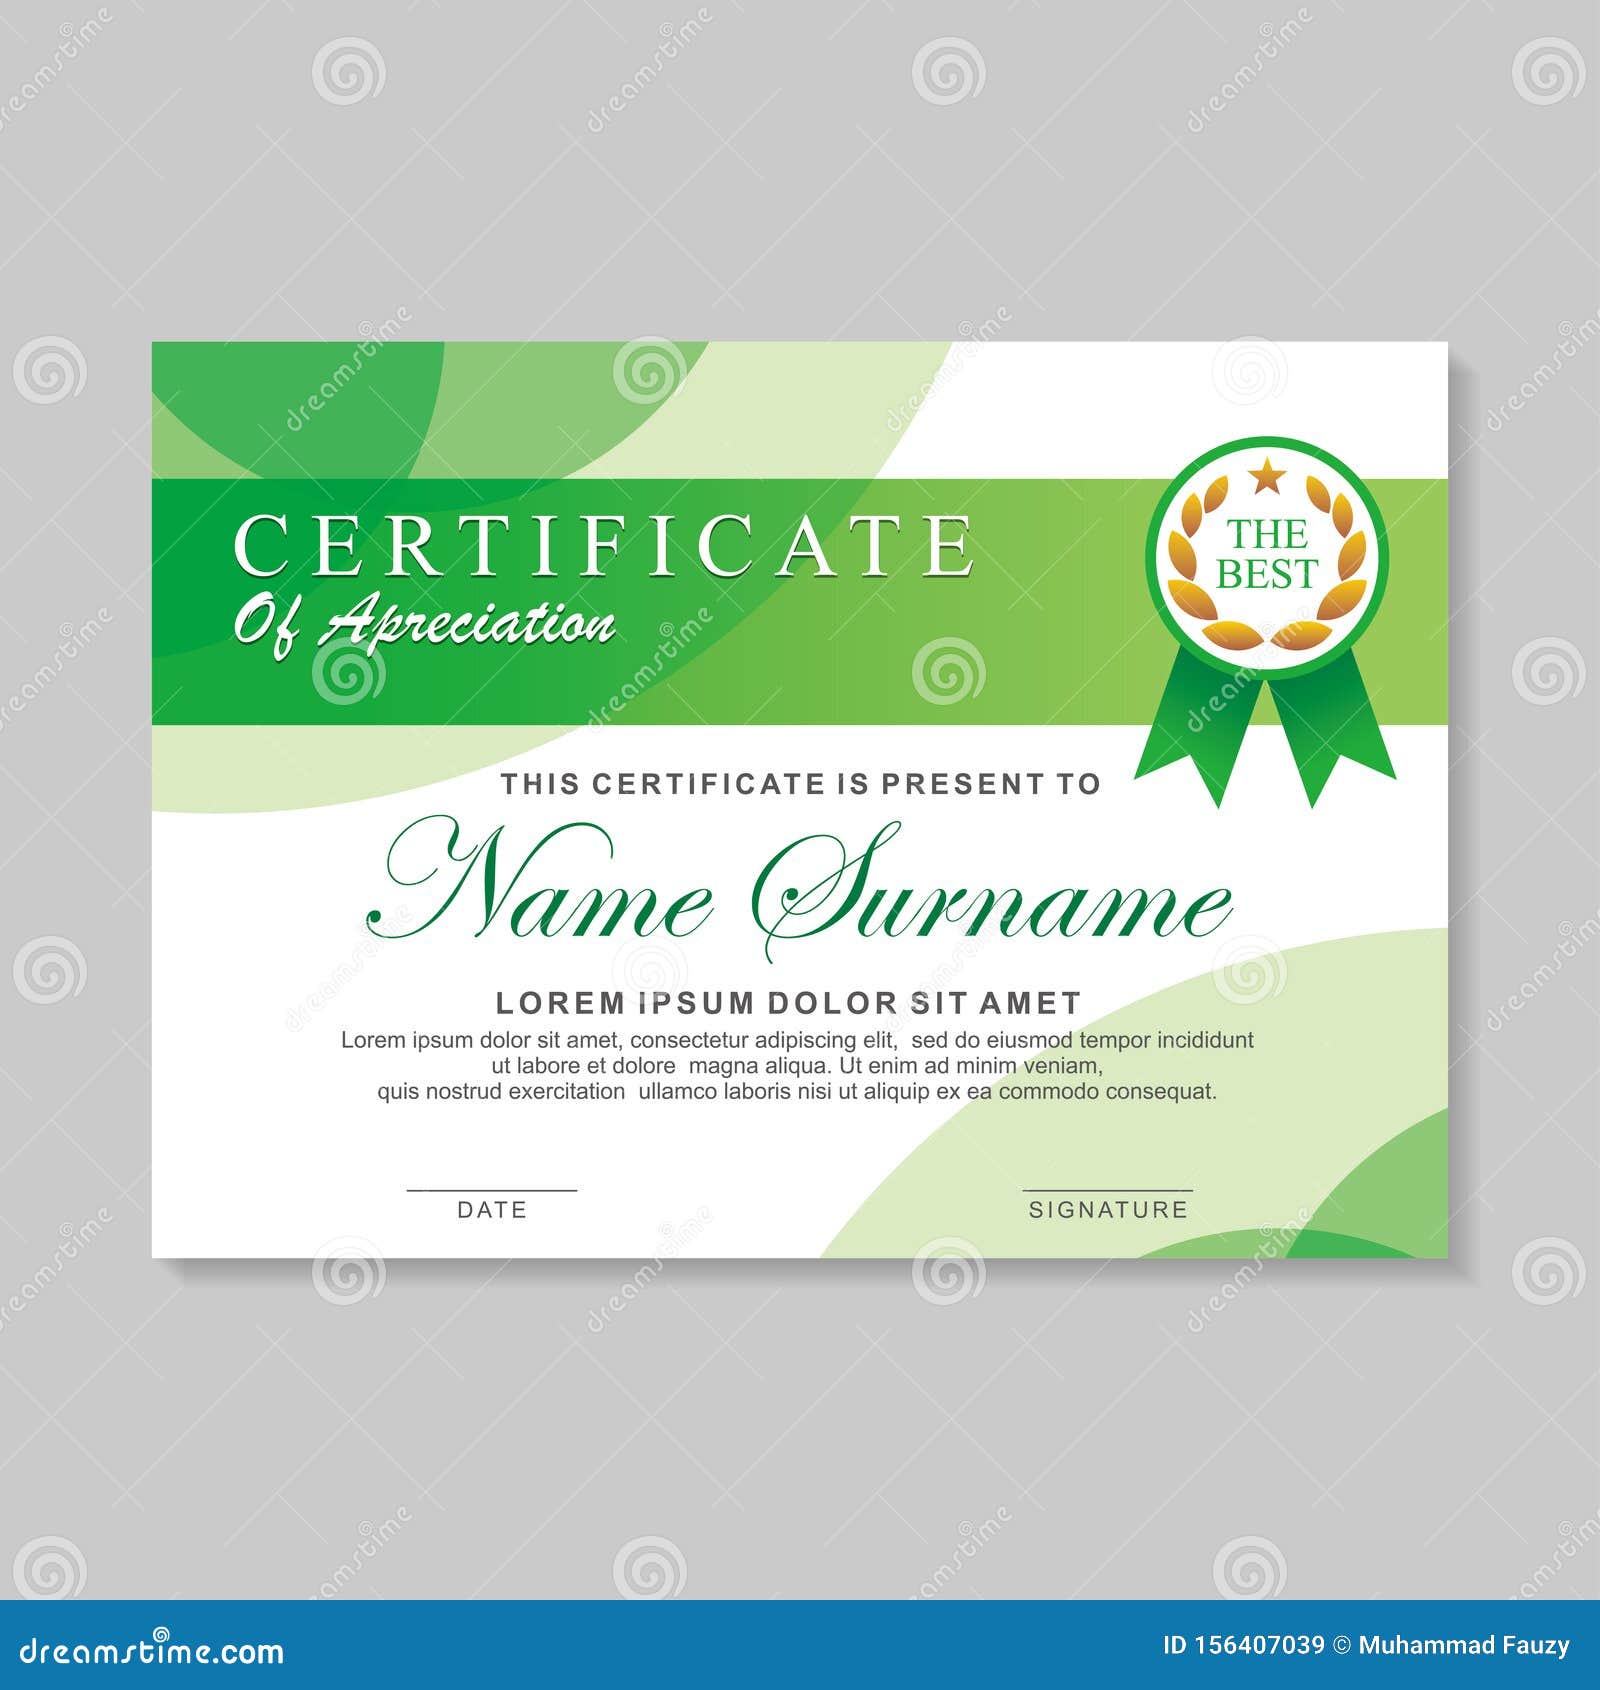 Modern Certificate Design Template from thumbs.dreamstime.com